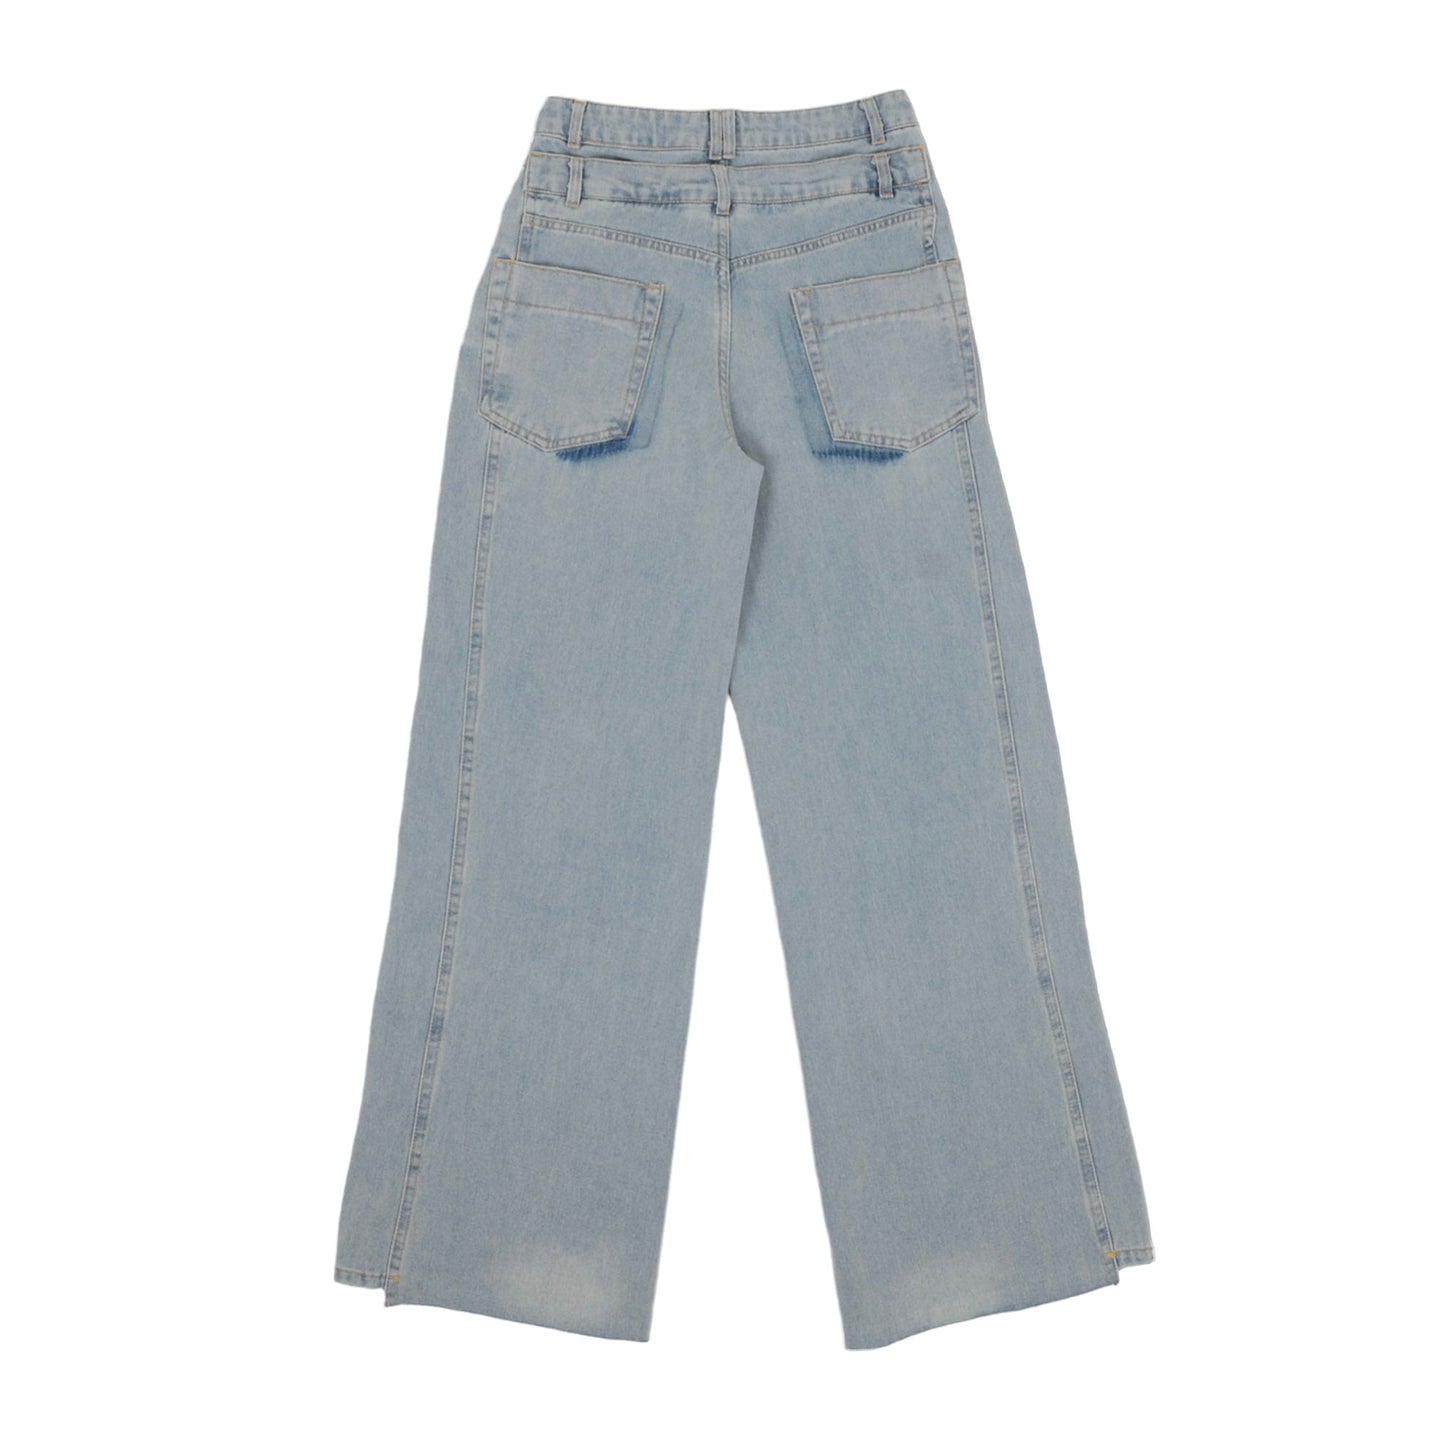 Up and Down Double Waist Jeans